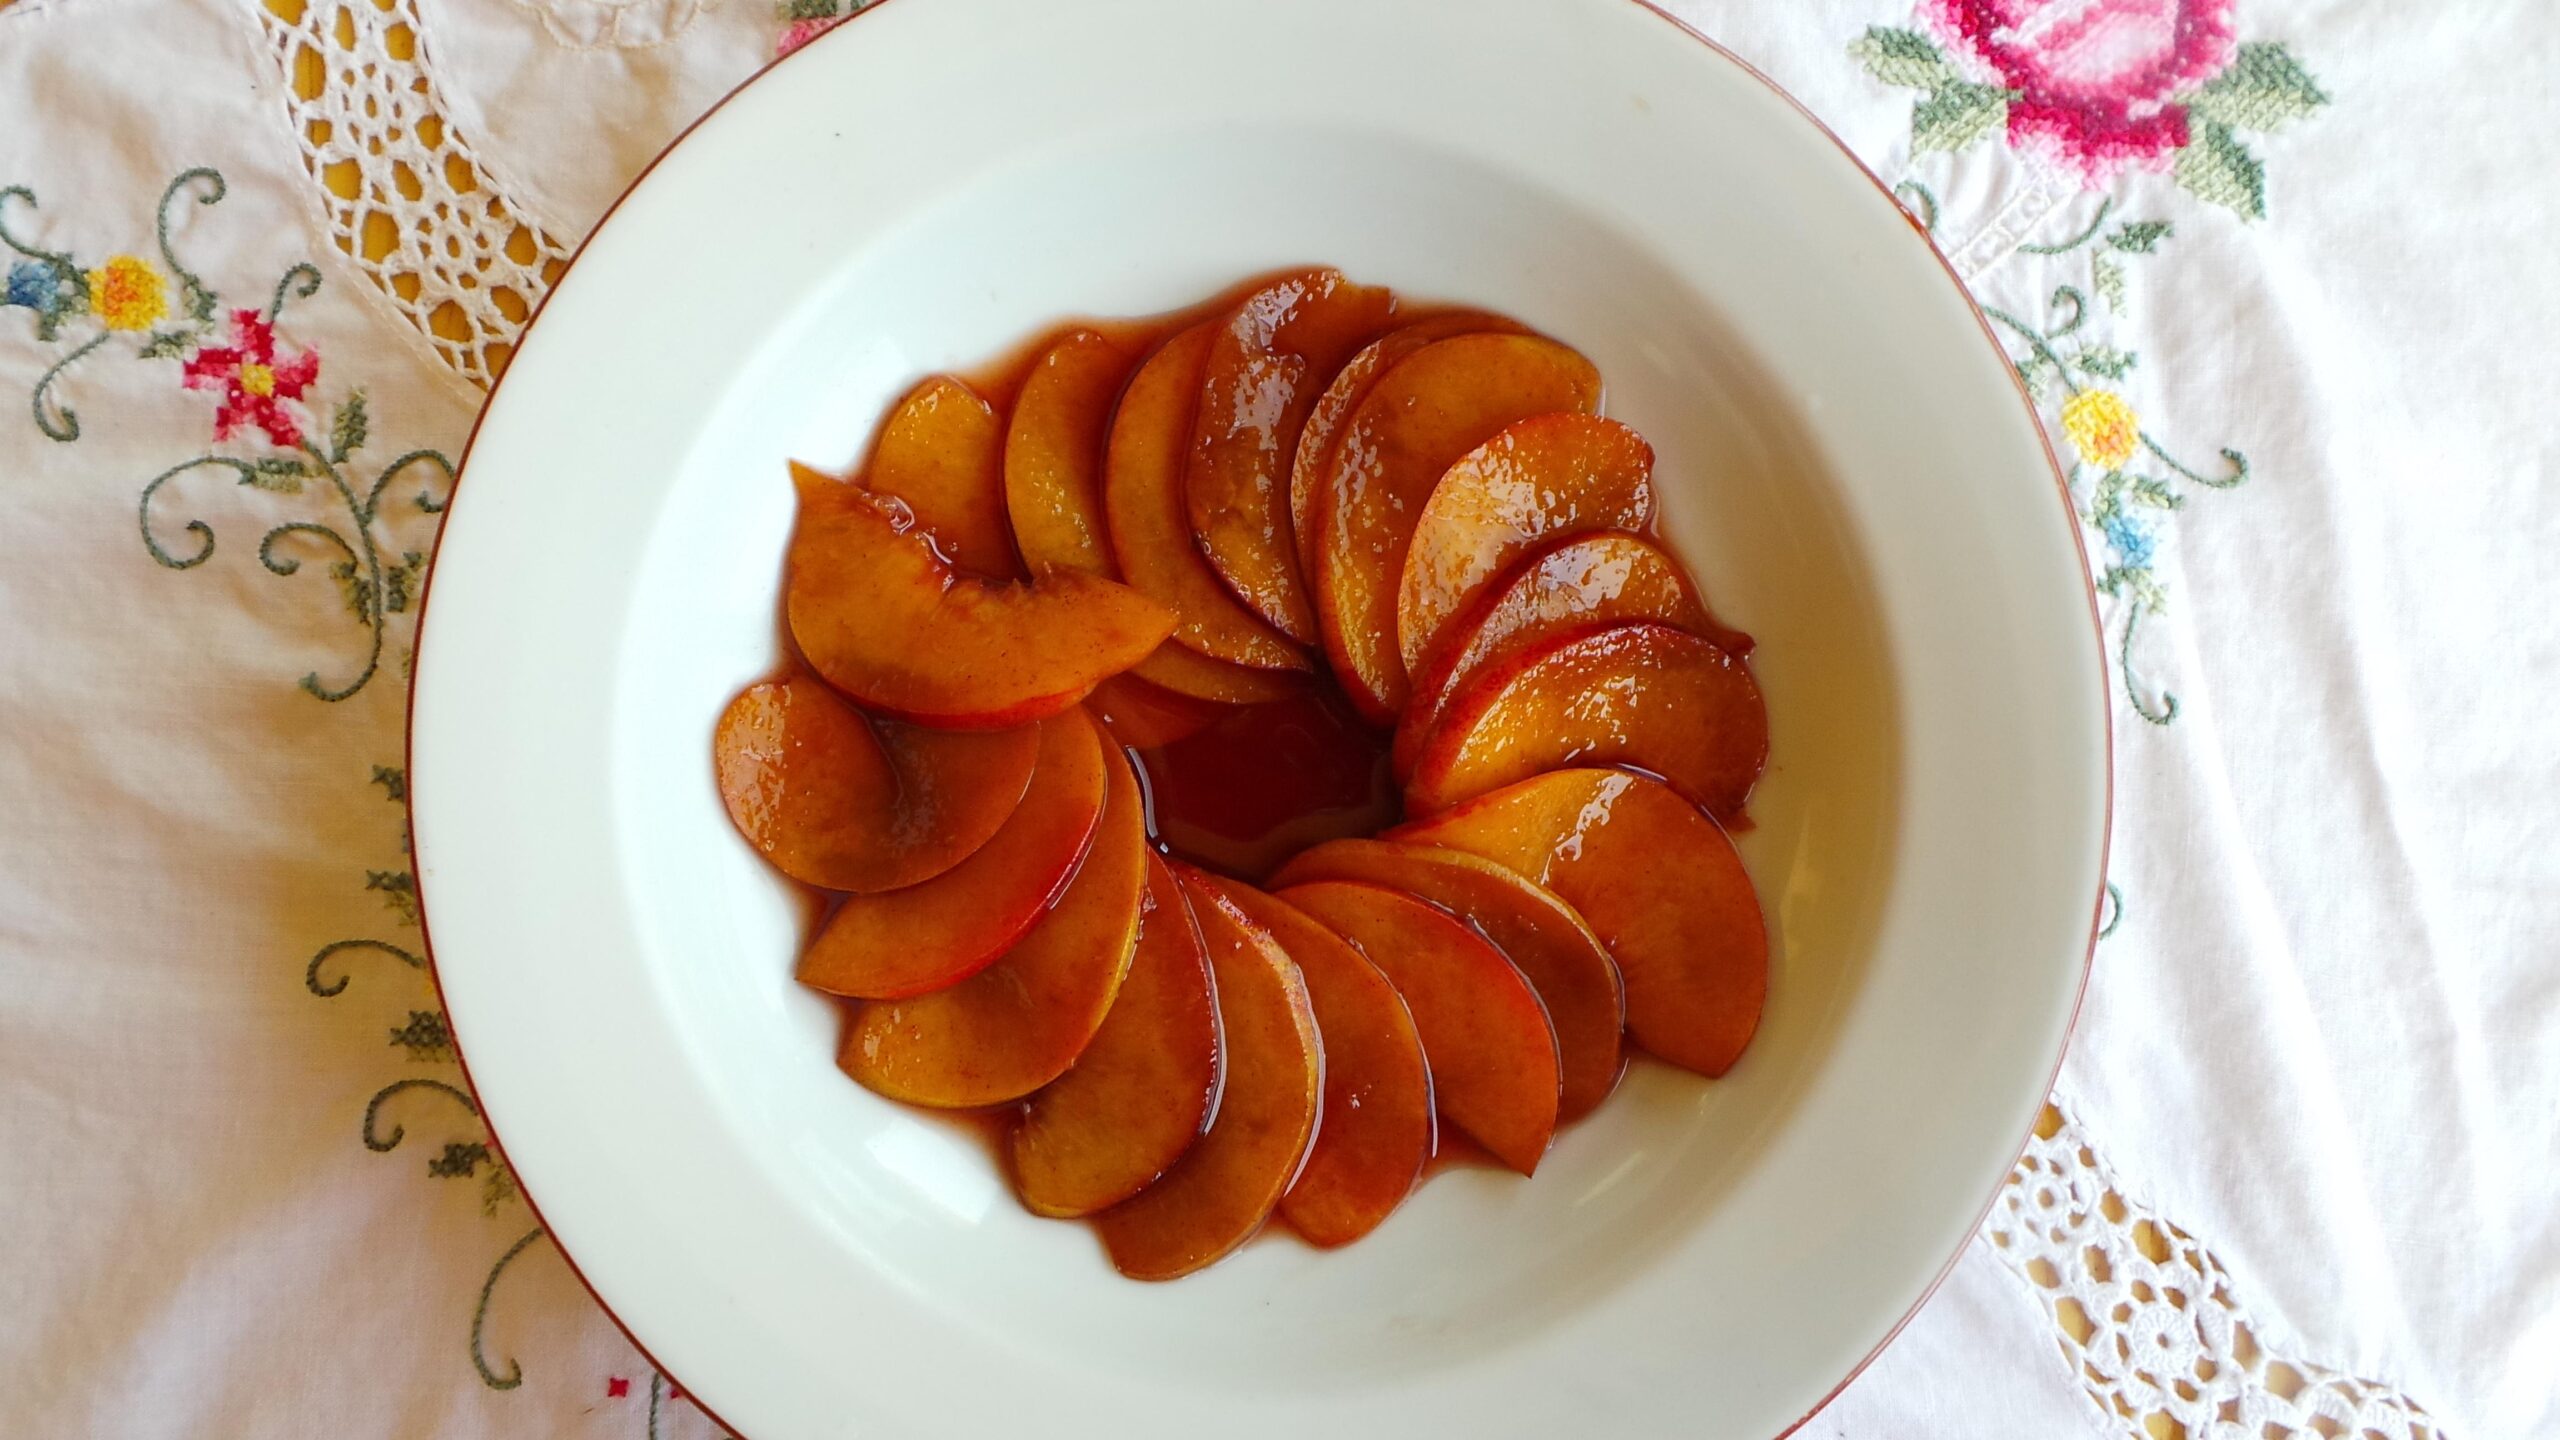  Just one bite of these juicy peaches and you'll be transported to the vineyard in Bordeaux.